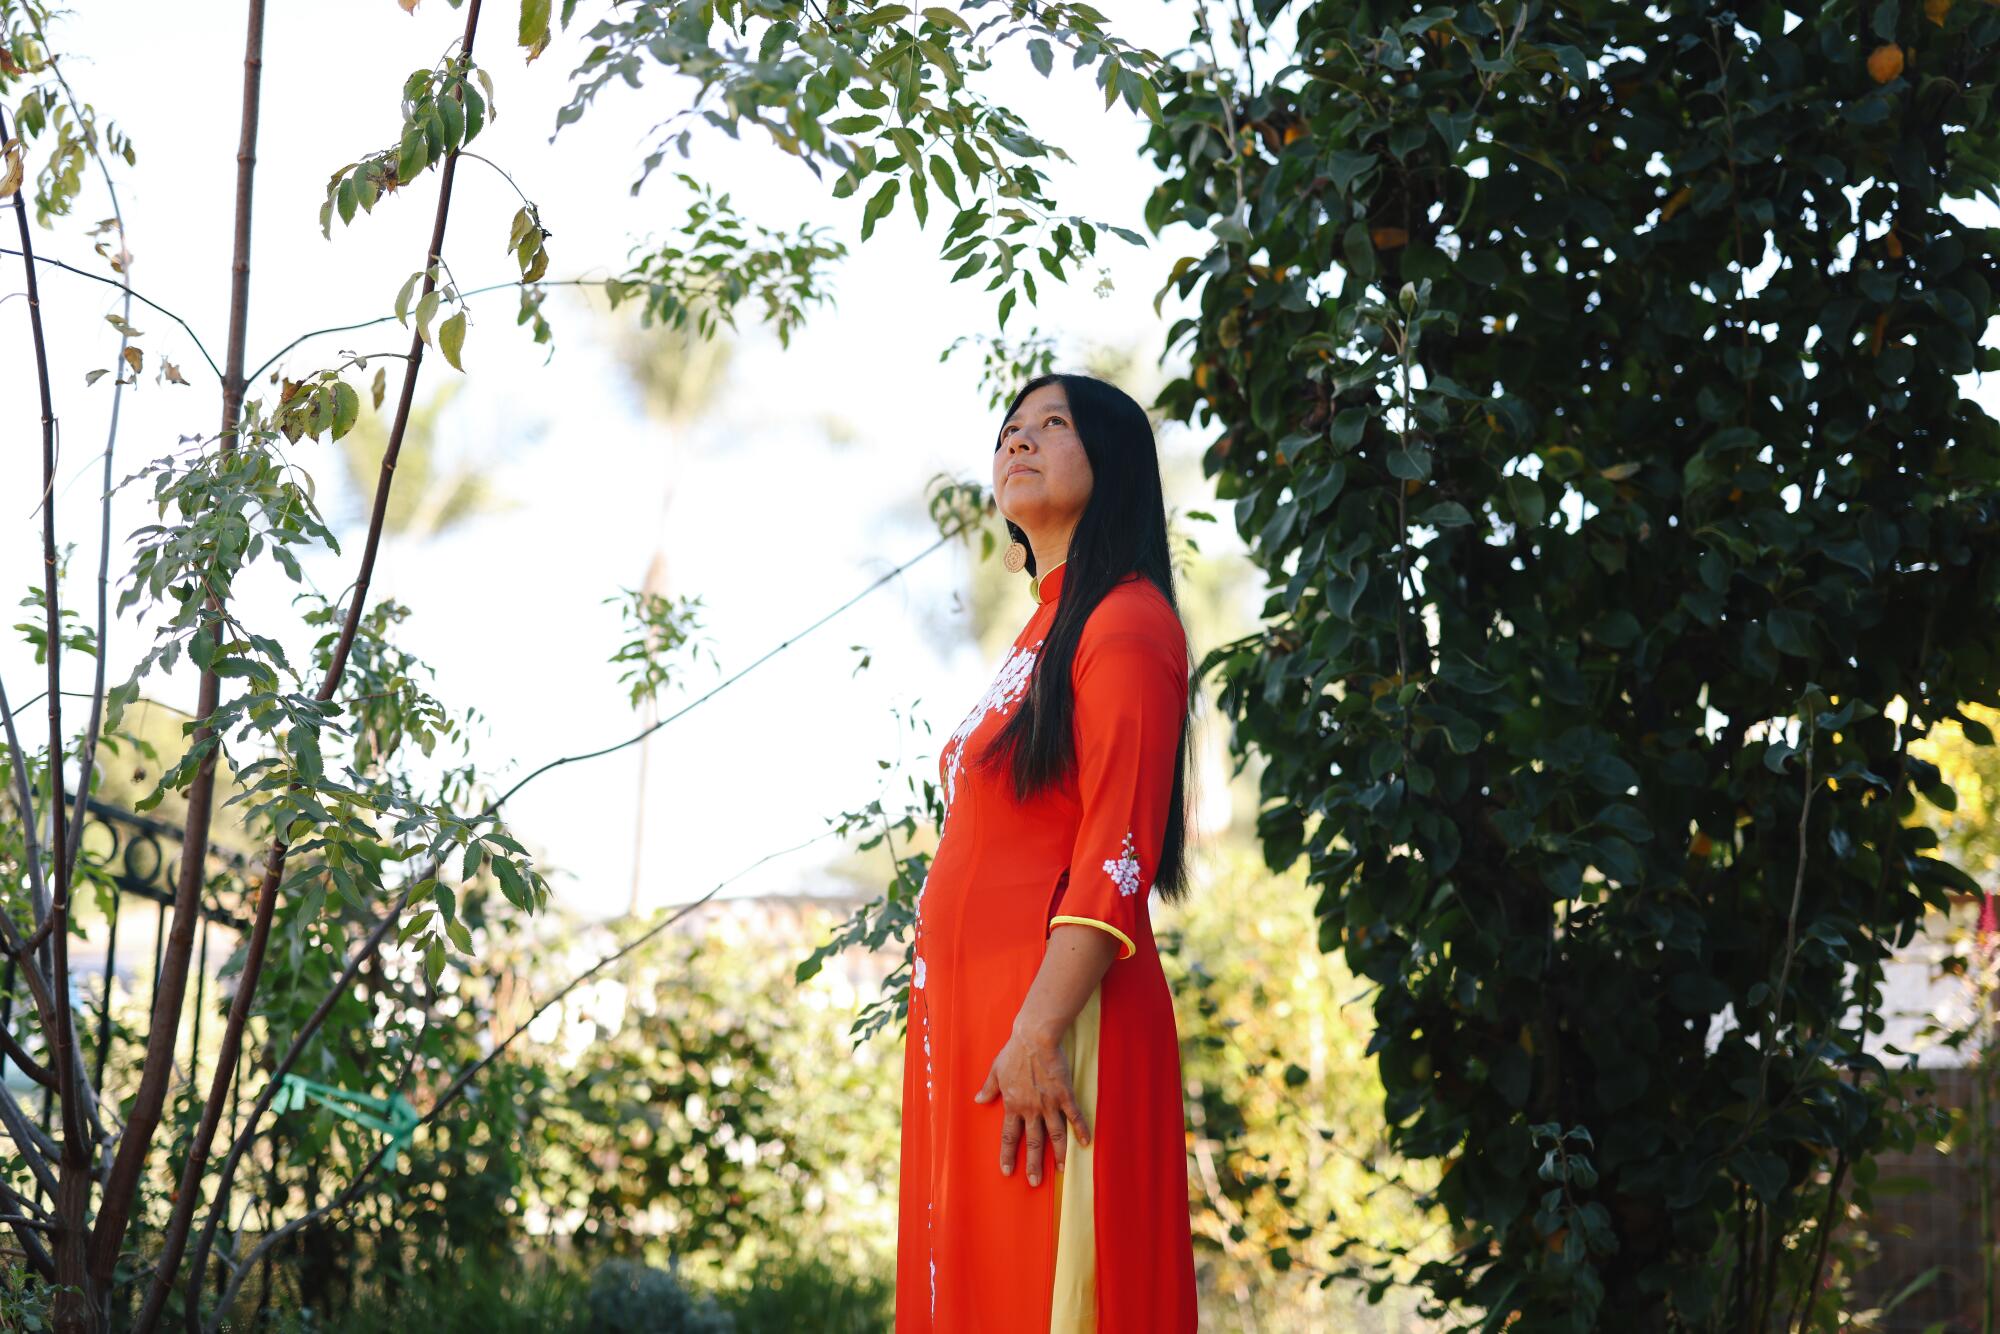 Teresa Mei Chuc stands in a bright red dress among green trees, looking into the distance. 